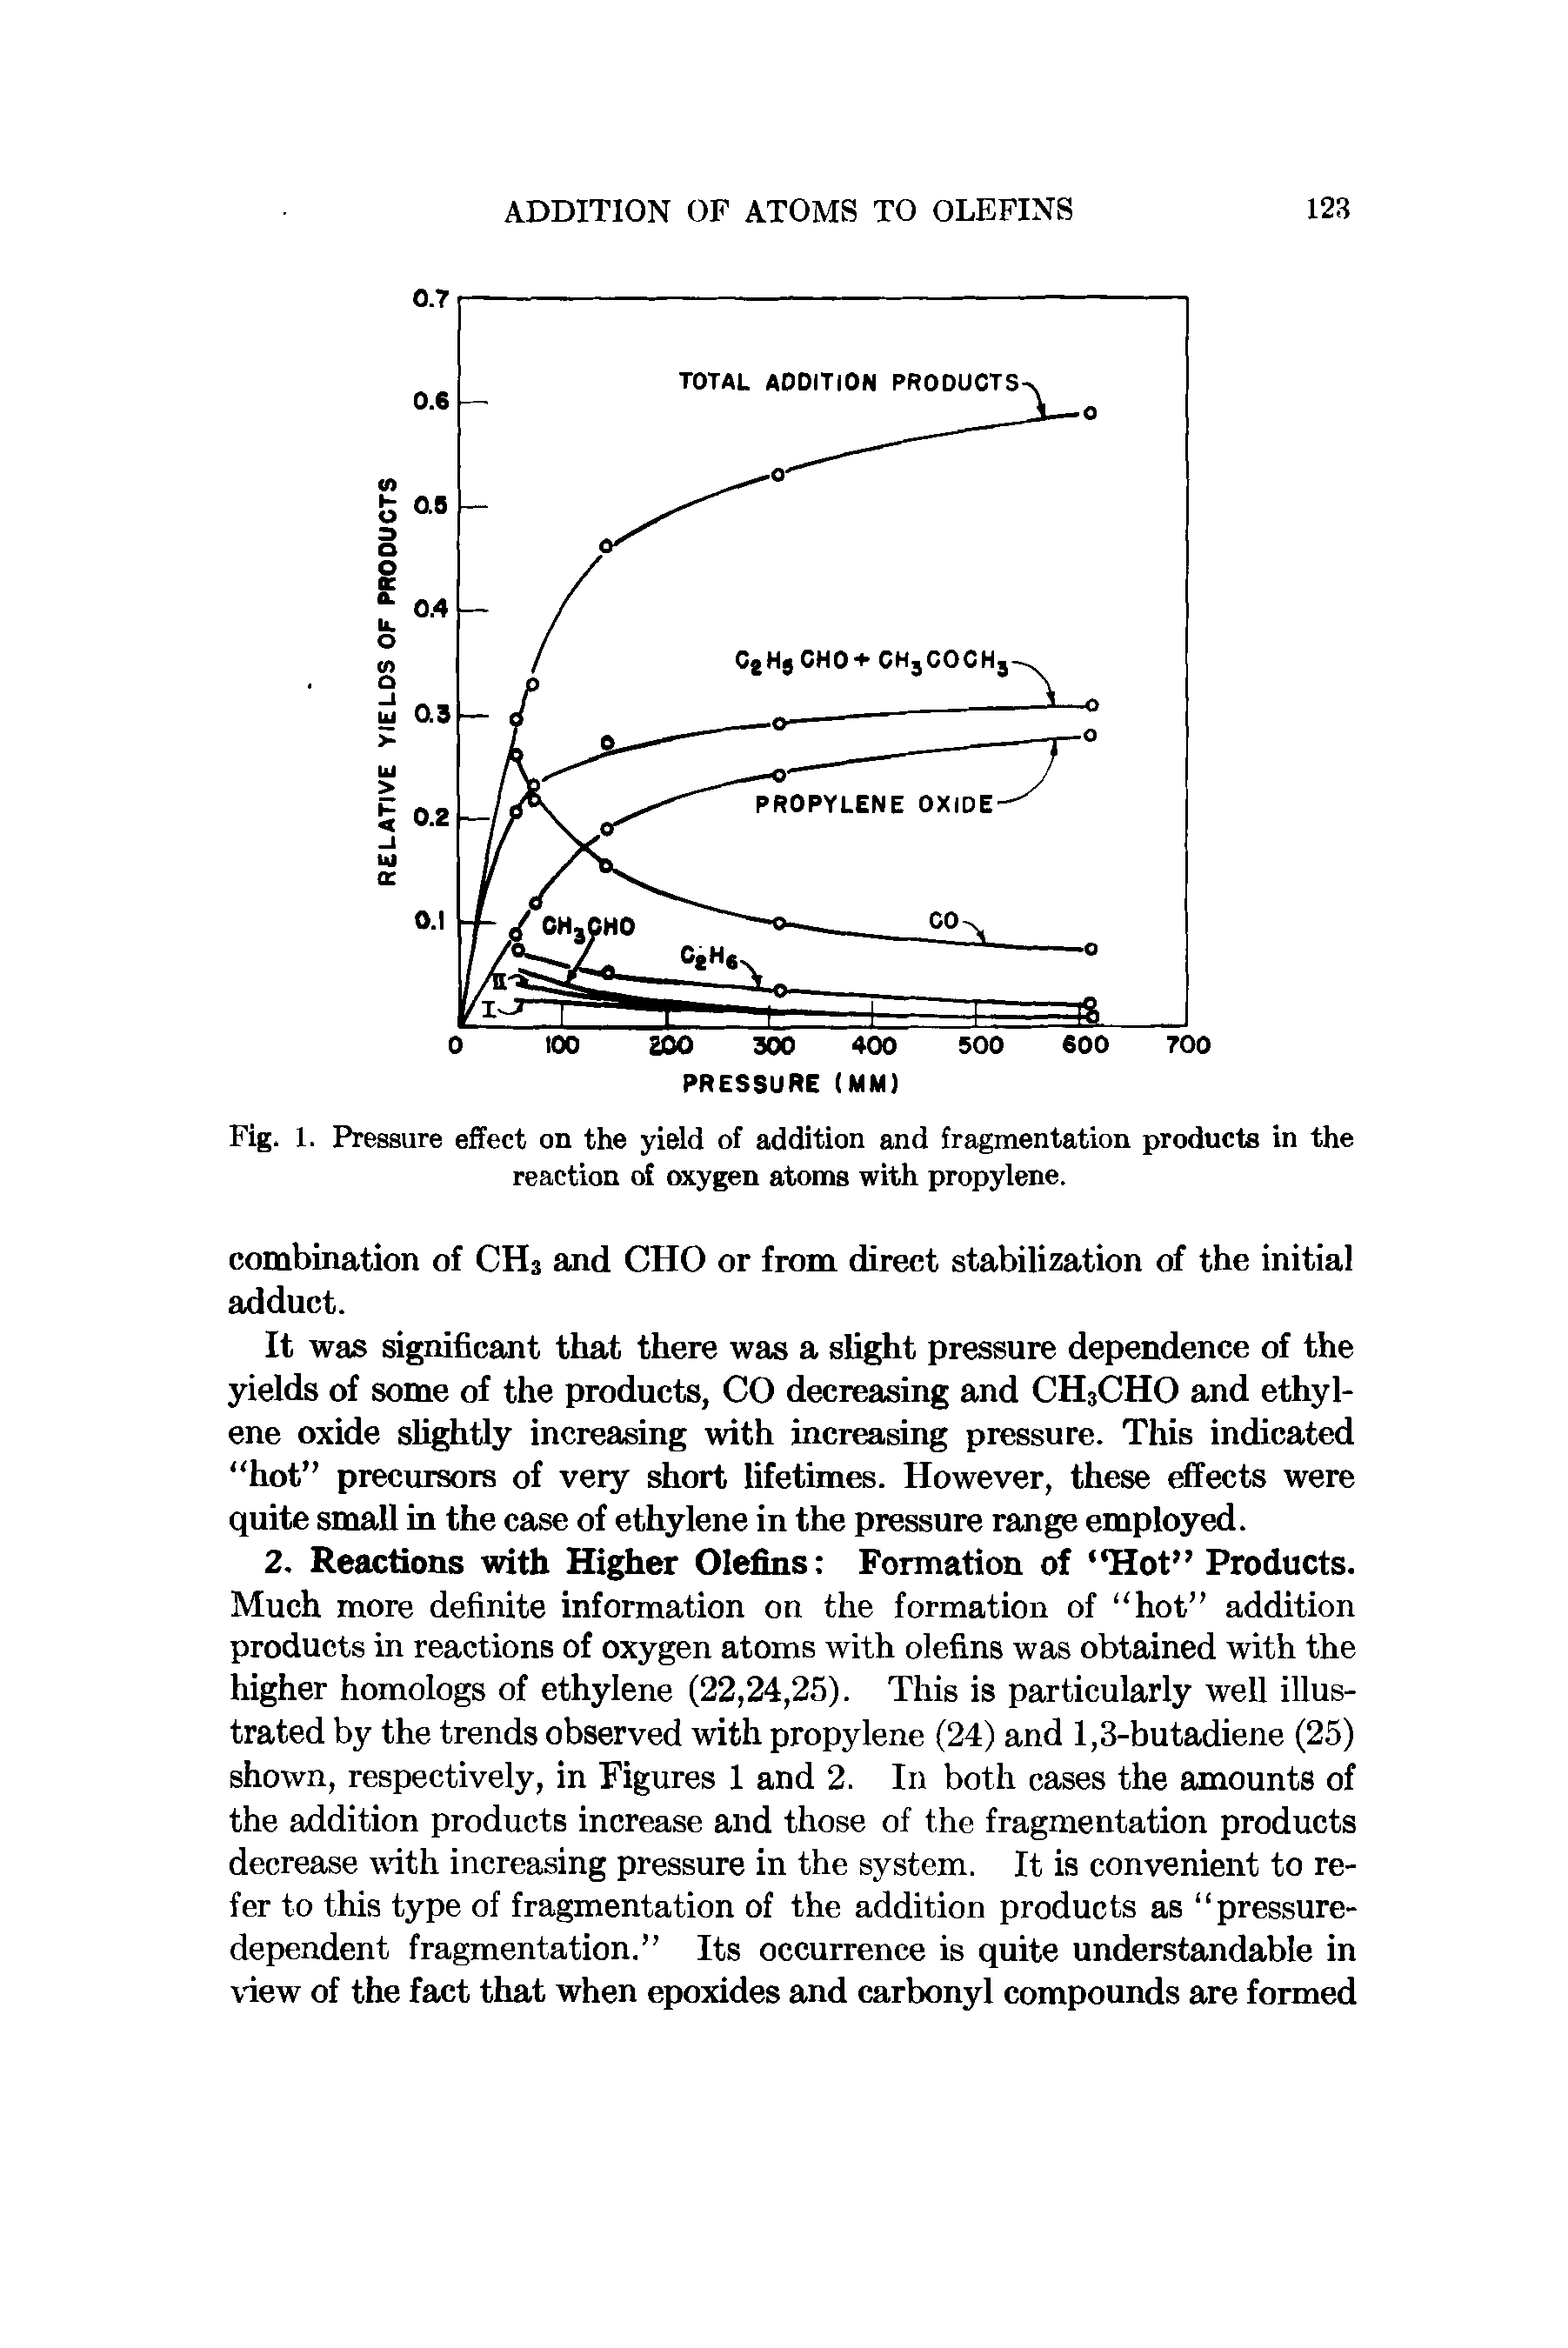 Fig. 1. Pressure effect on the yield of addition and fragmentation products in the reaction of oxygen atoms with propylene.